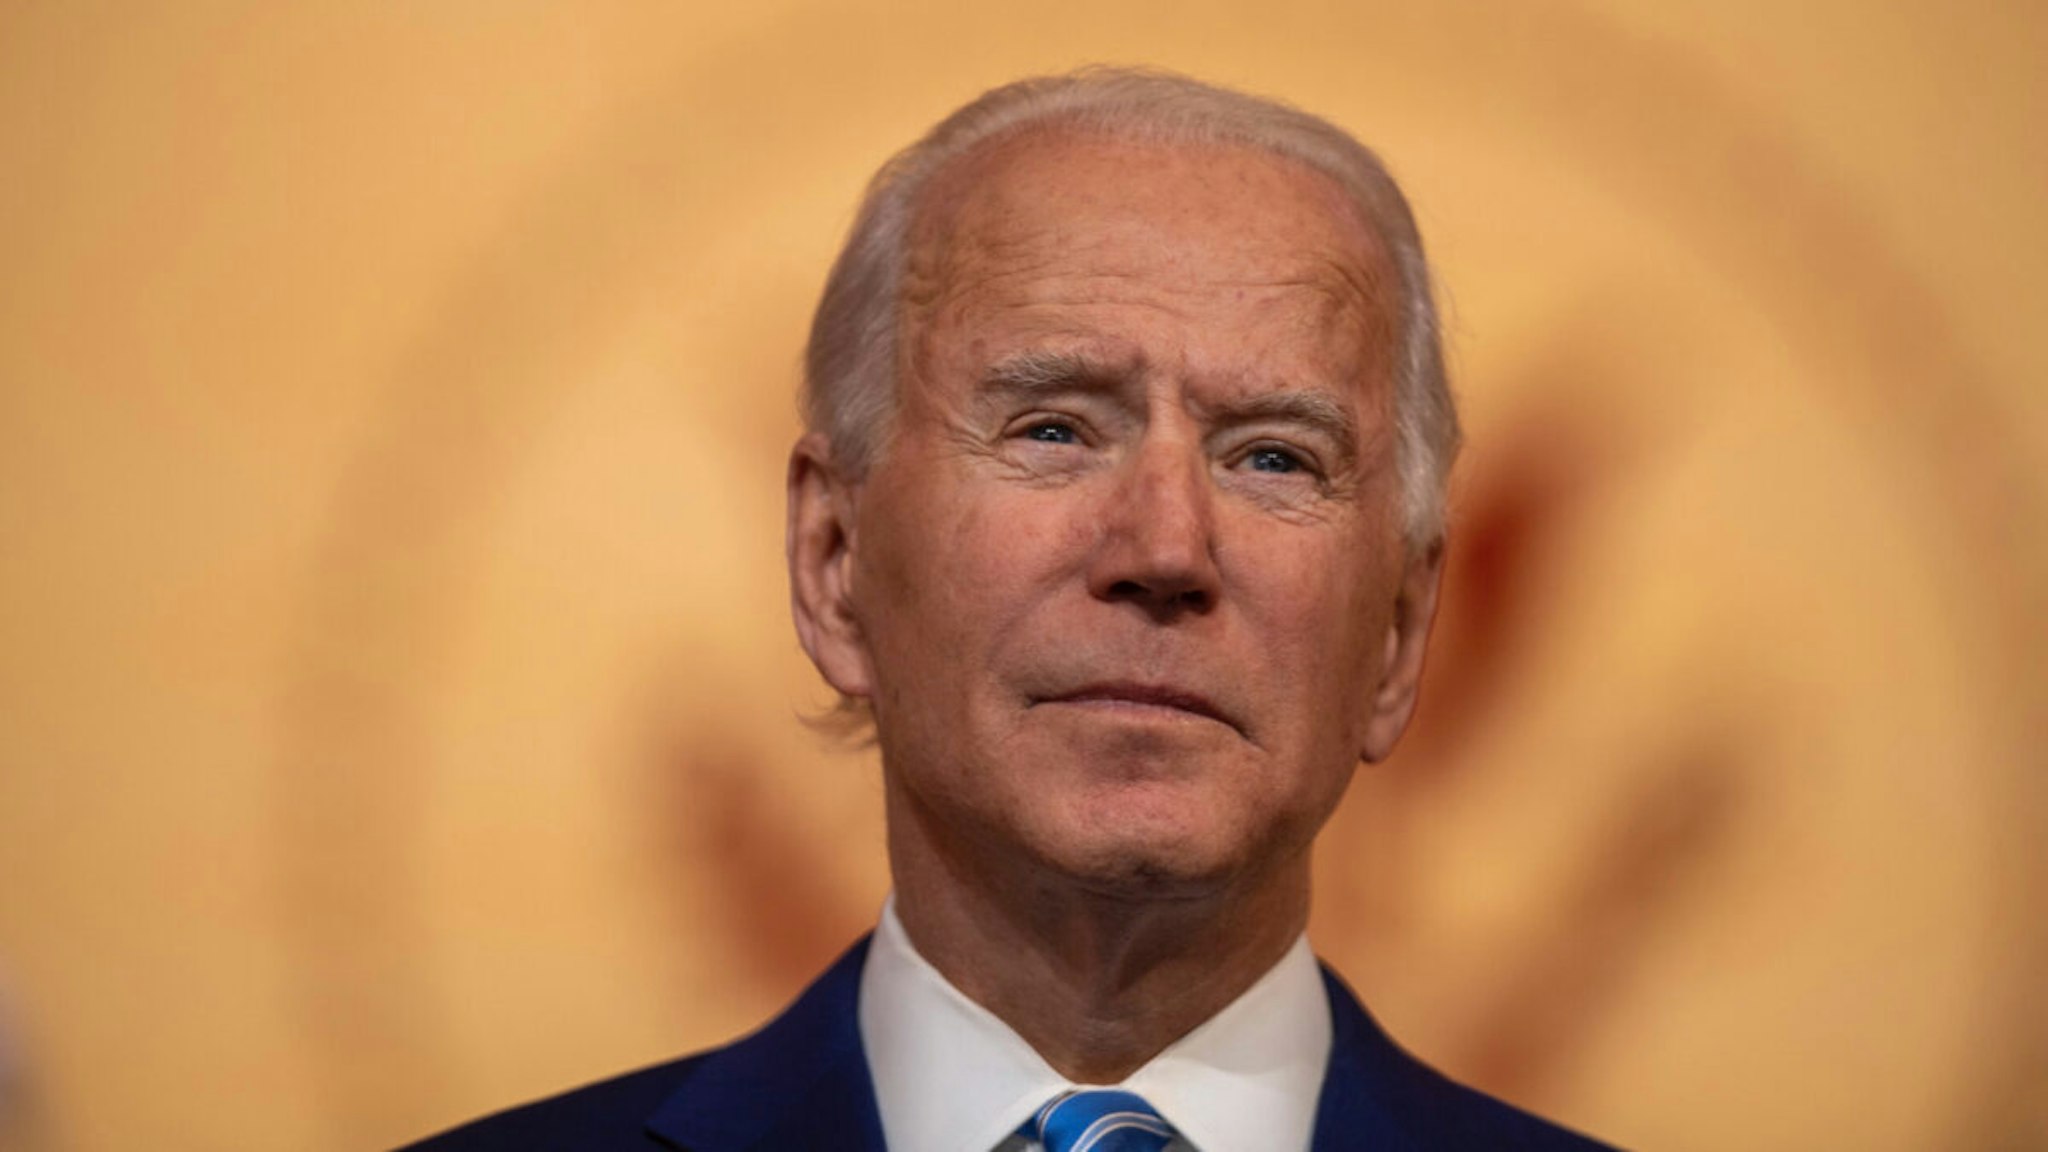 President-elect Joe Biden delivers a Thanksgiving address at the Queen Theatre on November 25, 2020 in Wilmington, Delaware.